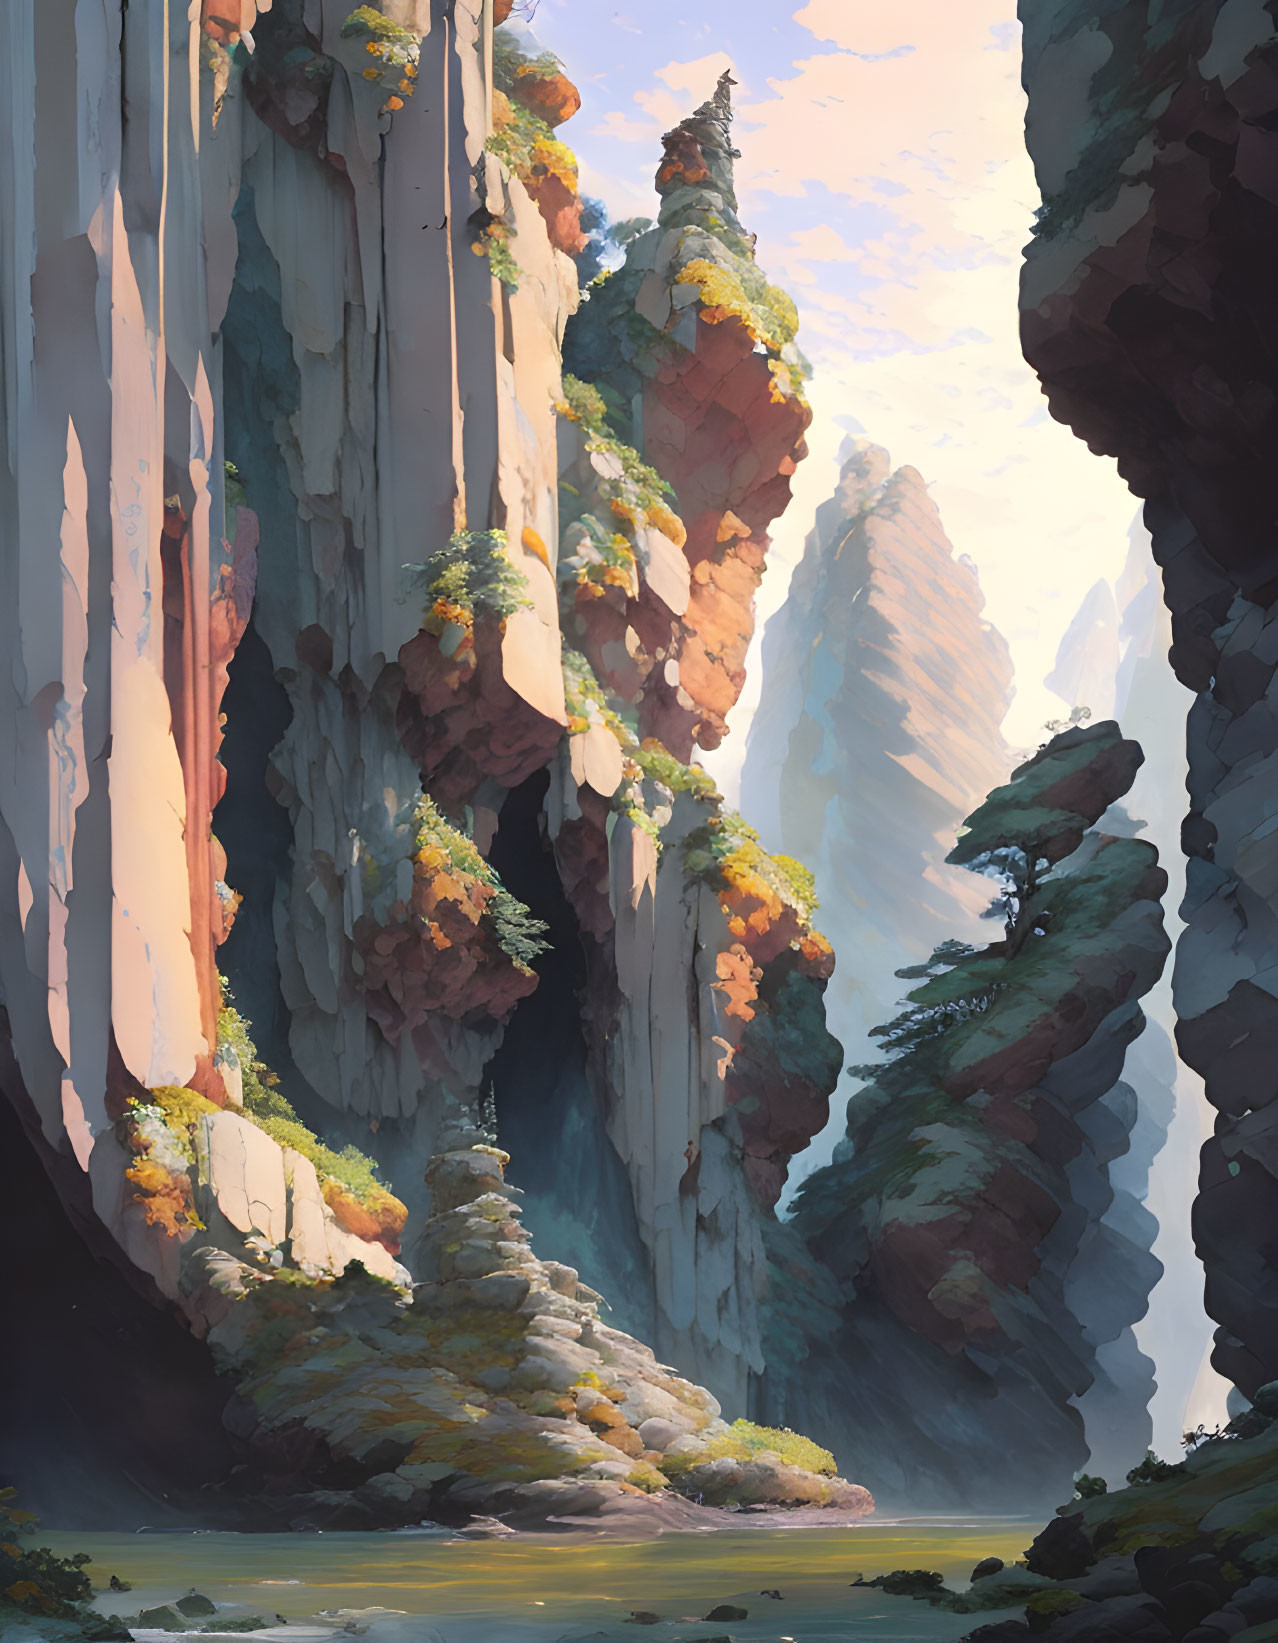 Vertical Cliffs with Lush Greenery by Serene River